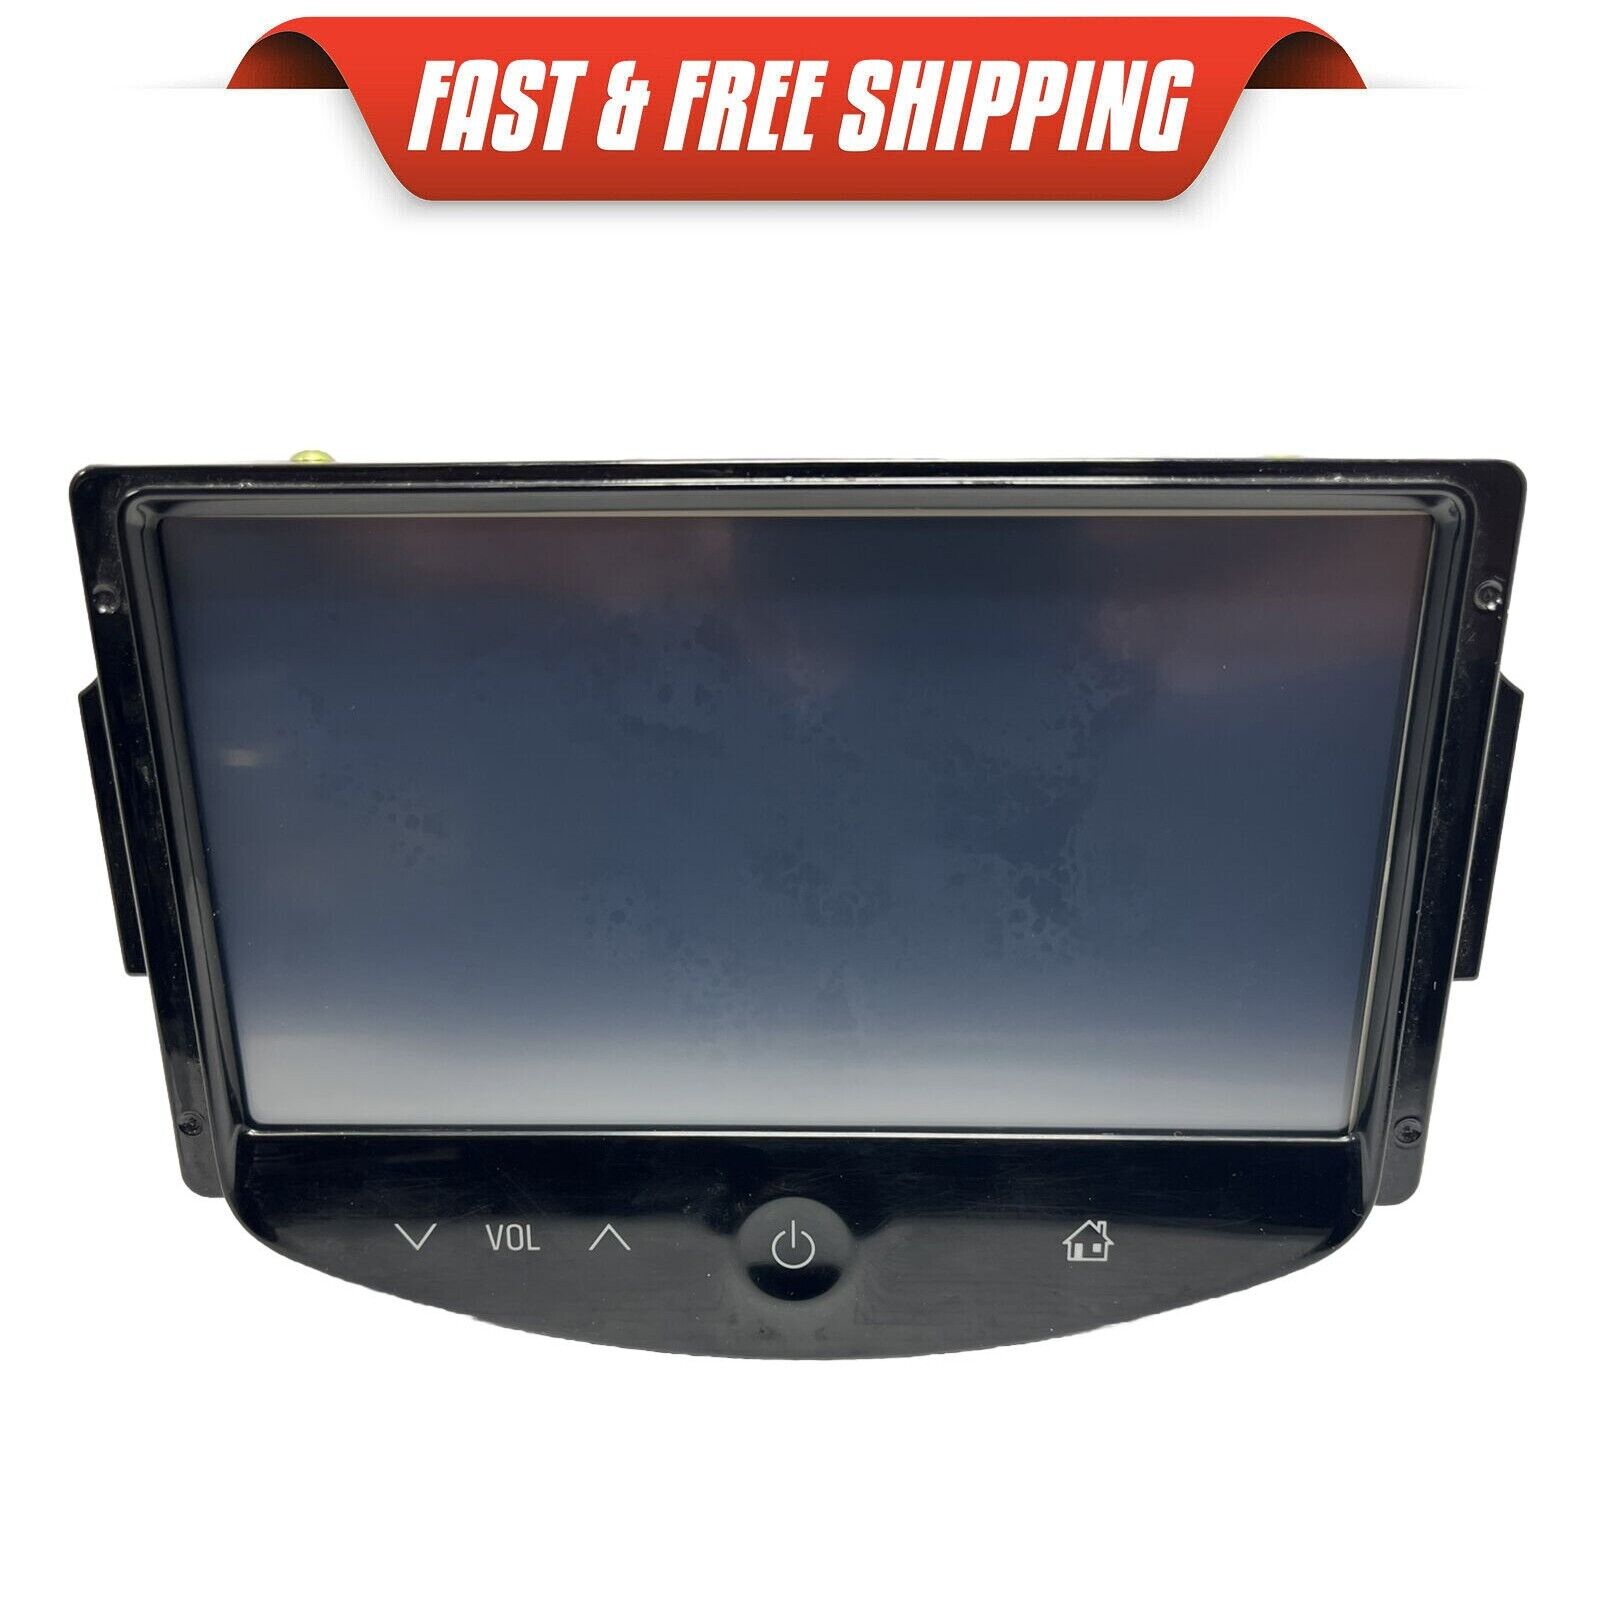 2015-2016 CHEVY SONIC RADIO RECEIVER DISPLAY TOUCH SCREEN ID 94518440 OEM